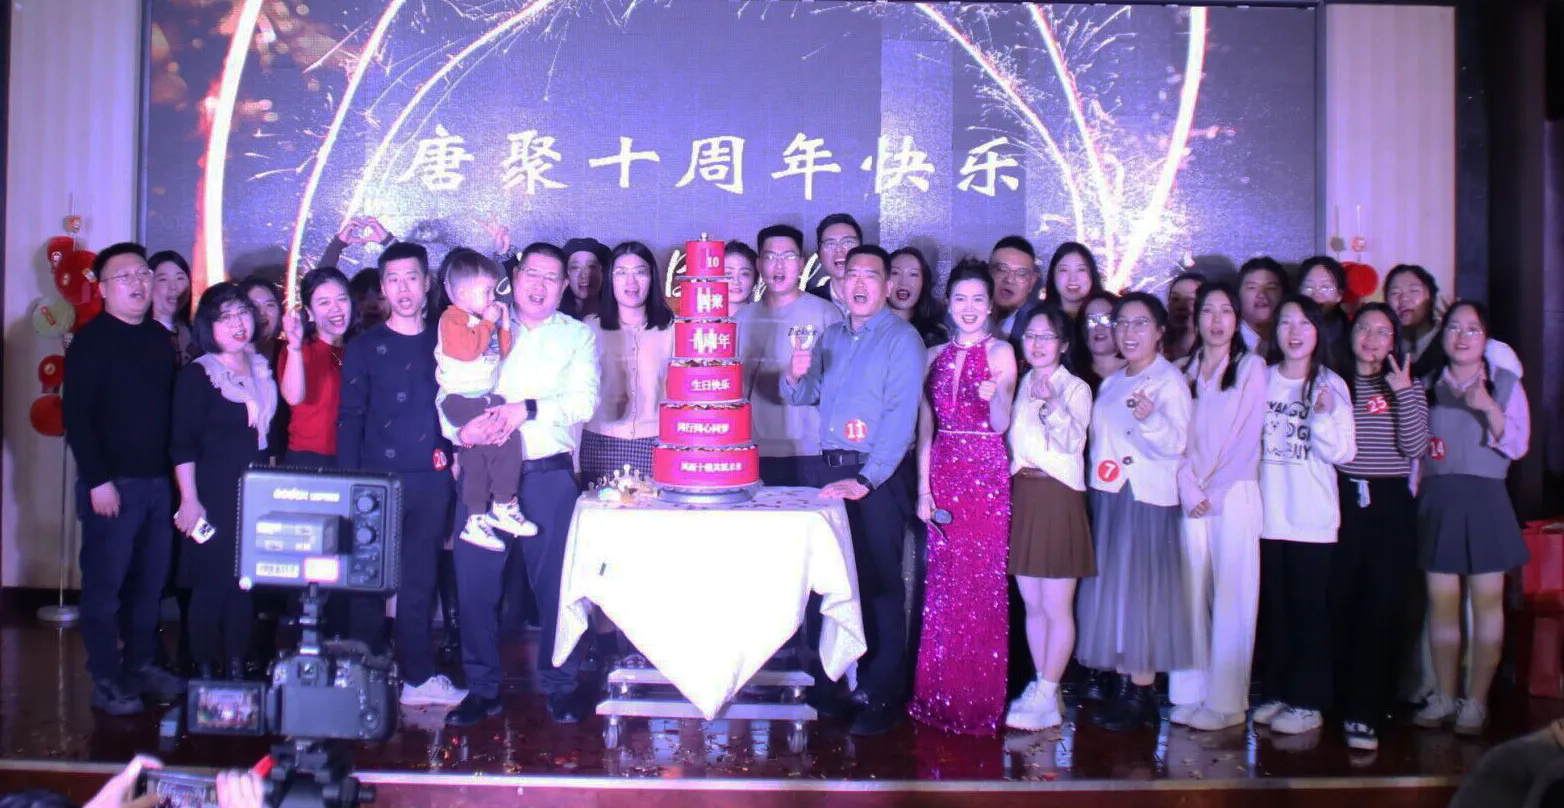 Tangju Trading Co., Ltd. Celebrates its Tenth Anniversary, Honoring a Decade of Excellence